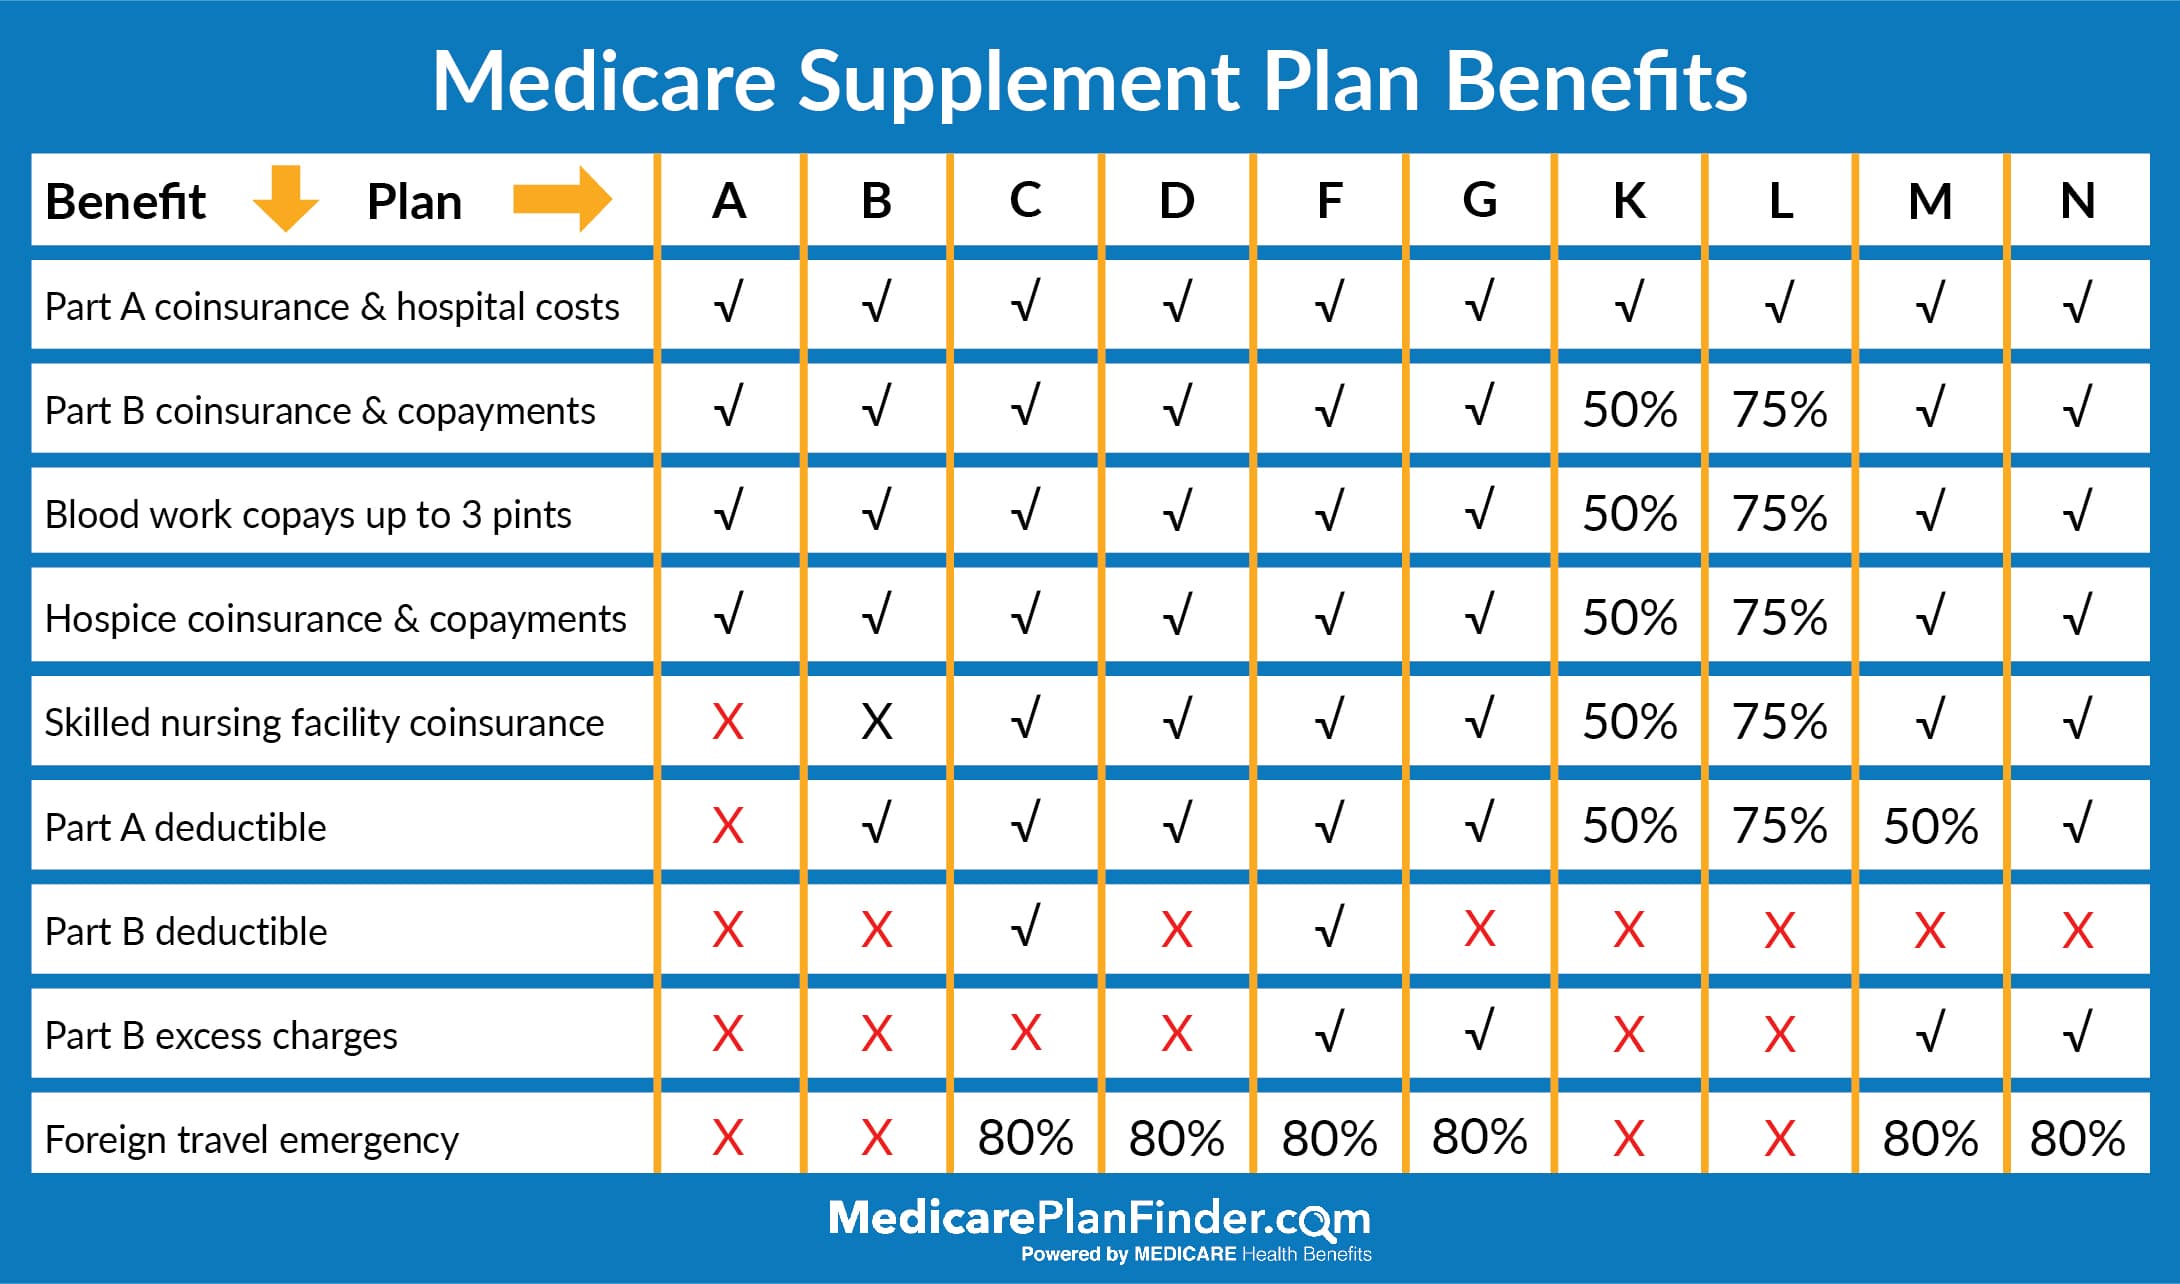 Compare Medicare Supplement Plans in Your Area